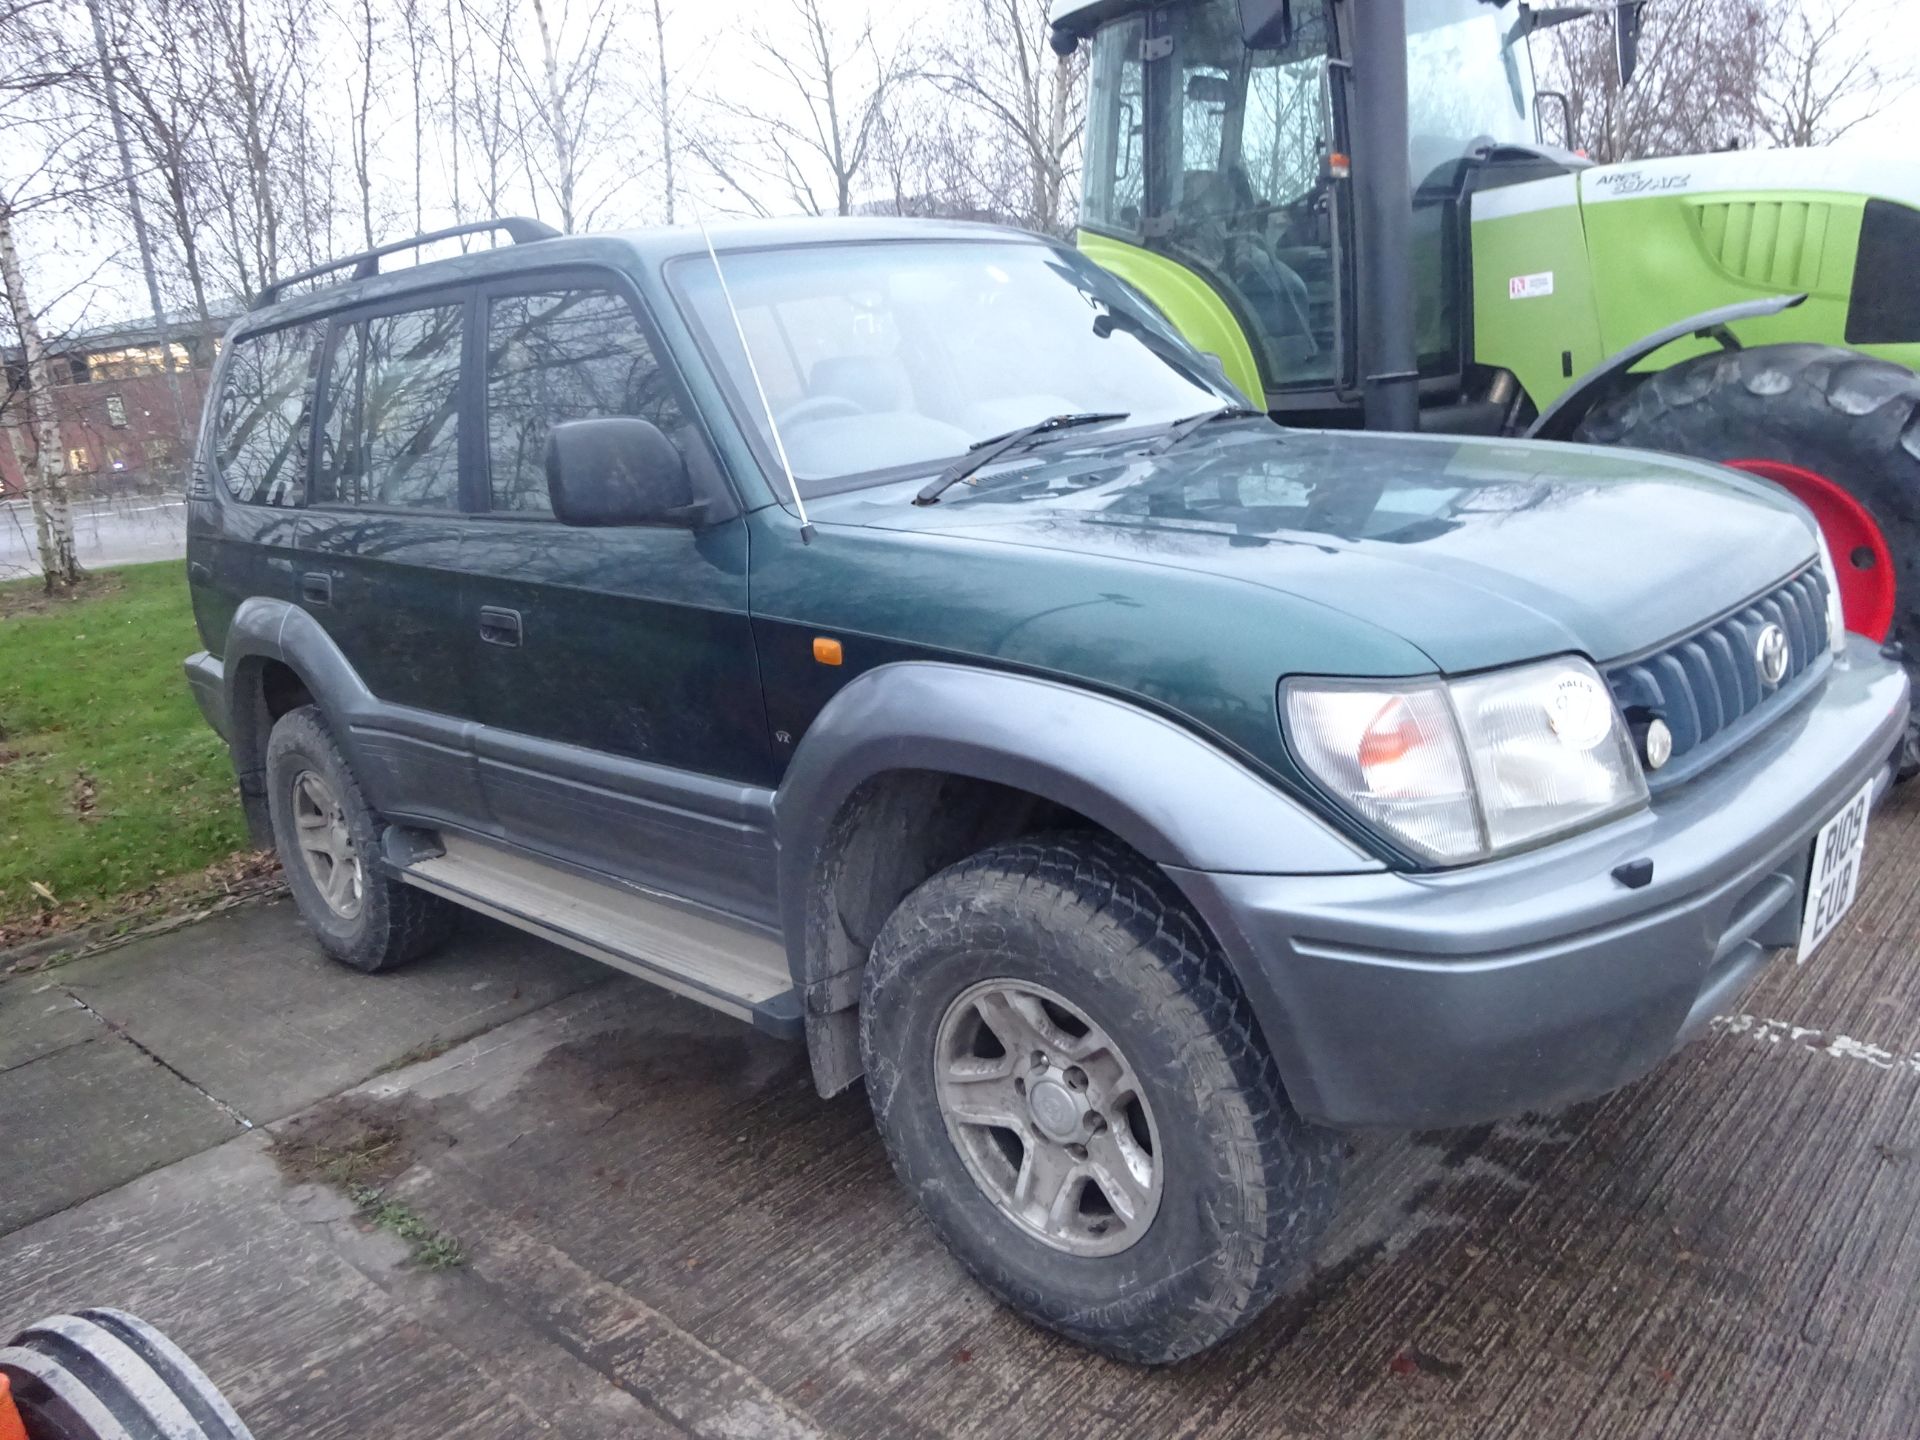 TOYOTA LAND CRUISER 32 YEARS OLD MOT JUNE 2021 - OFF ROAD AND ROAD TYRES - REGISTRATION R109 EUB